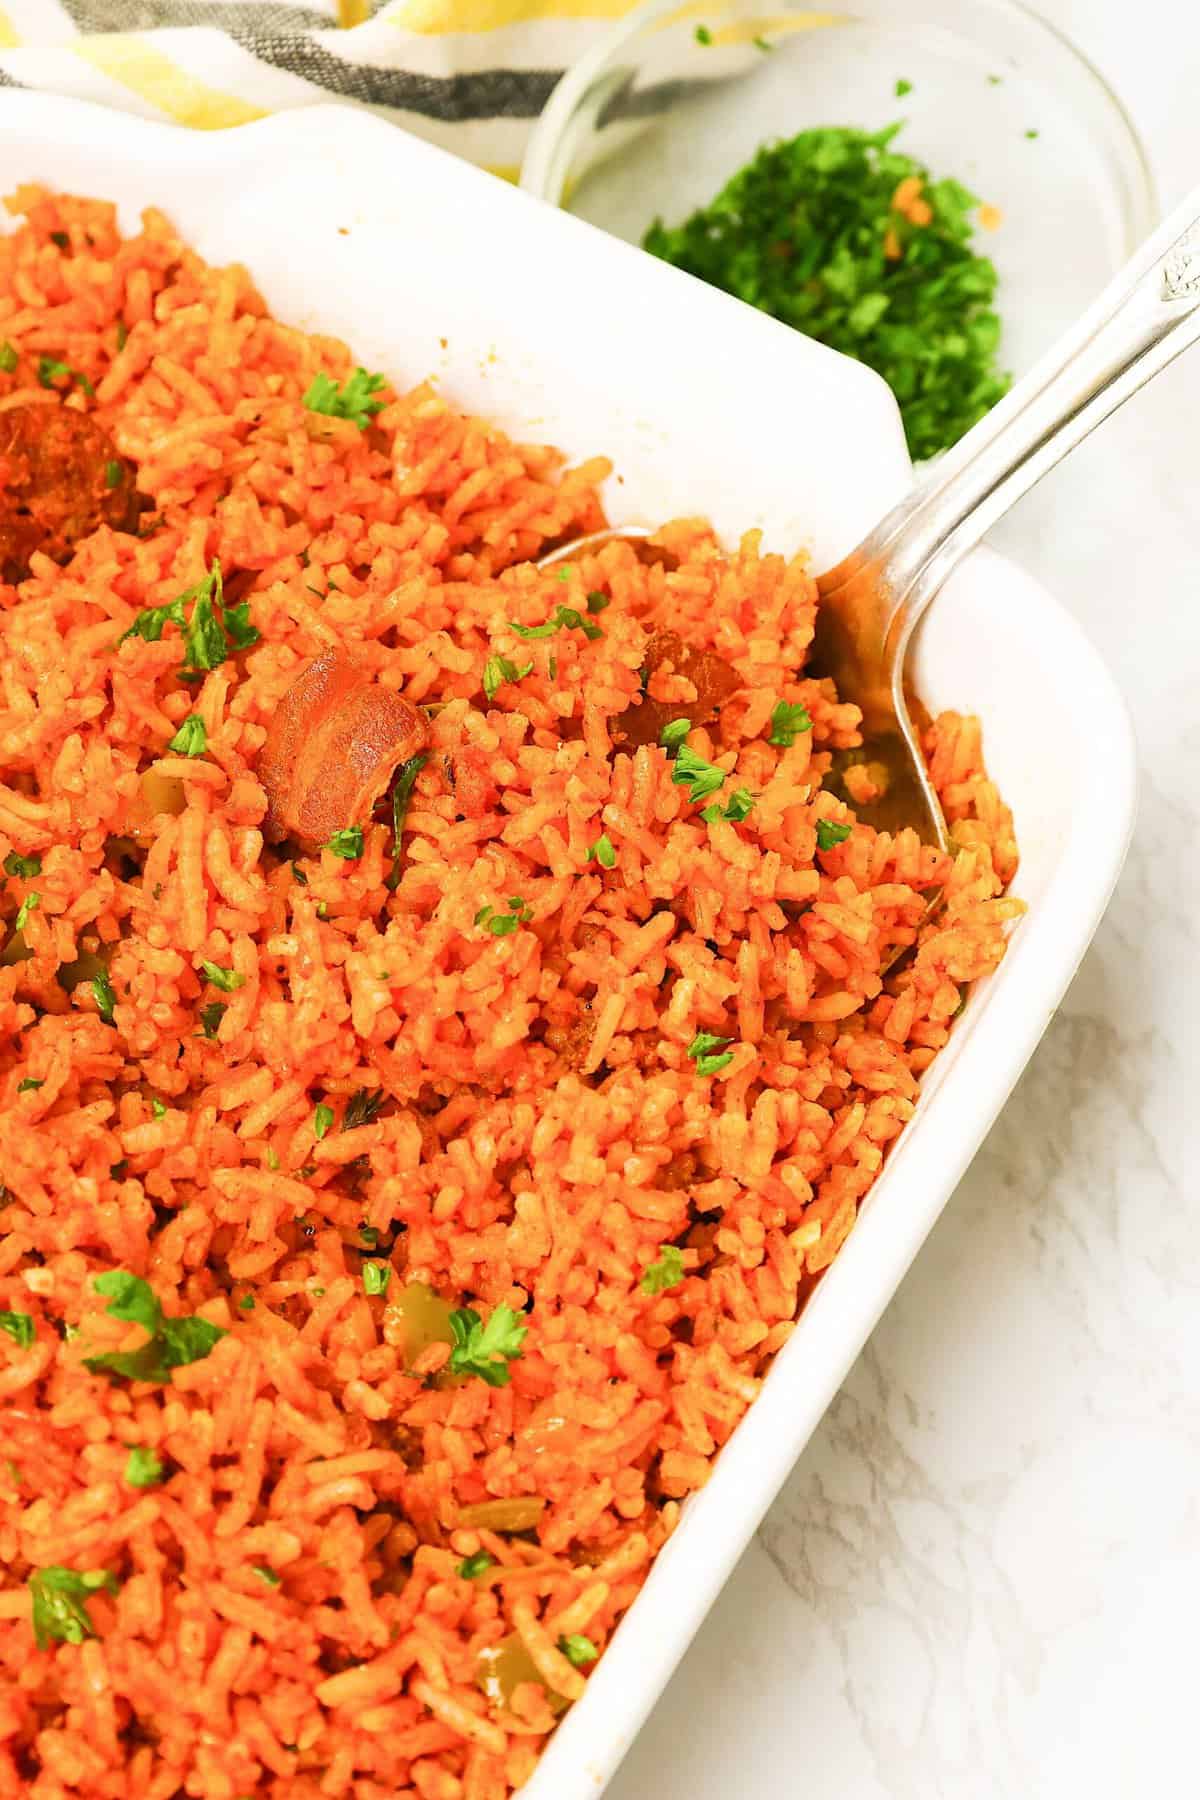 Serving up steaming hot Charleston Red Rice, and African influenced rice dish